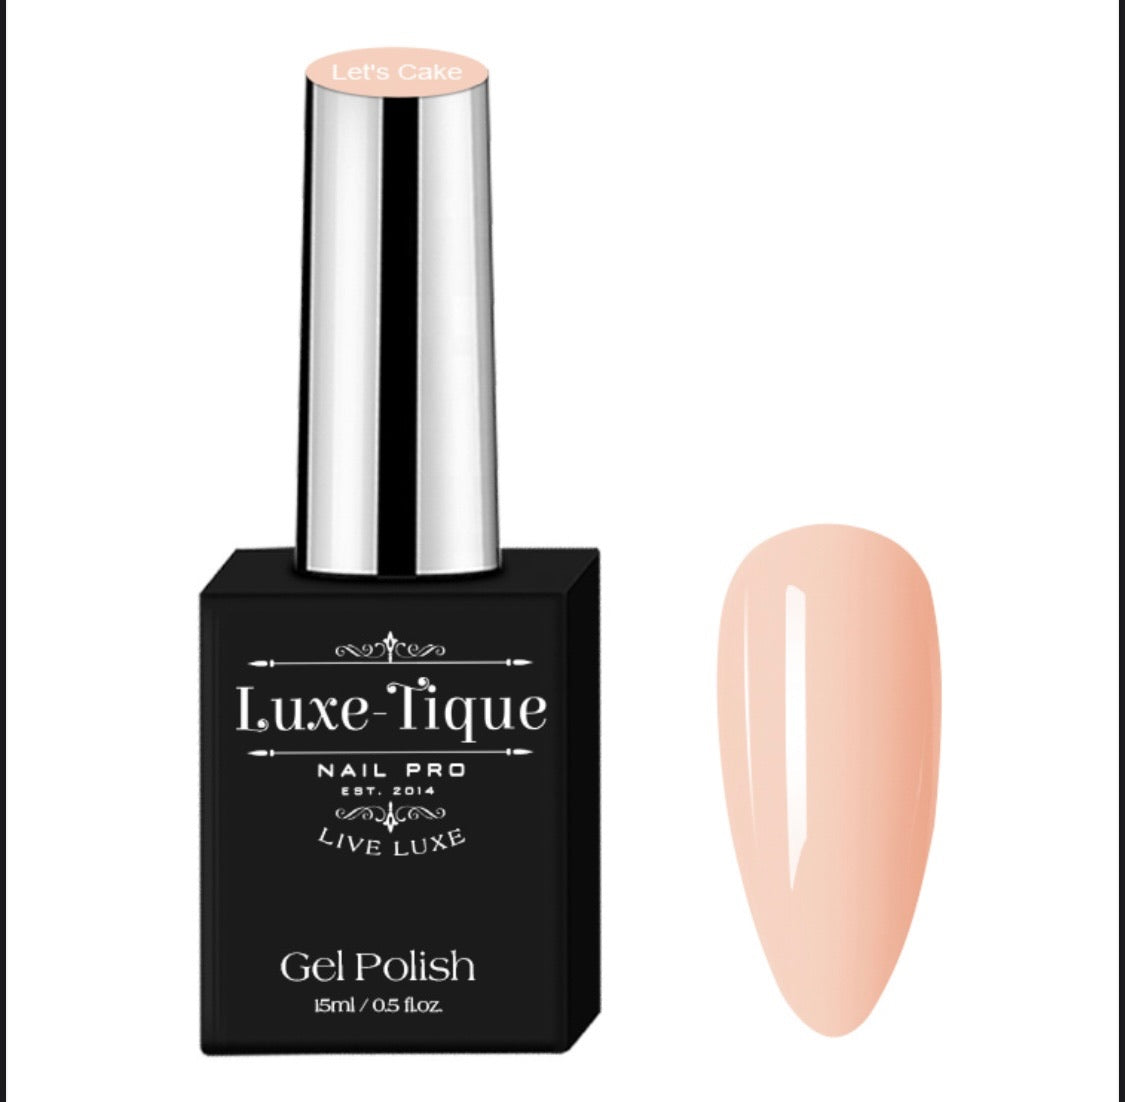 Let's Cake Luxe Gel Polish